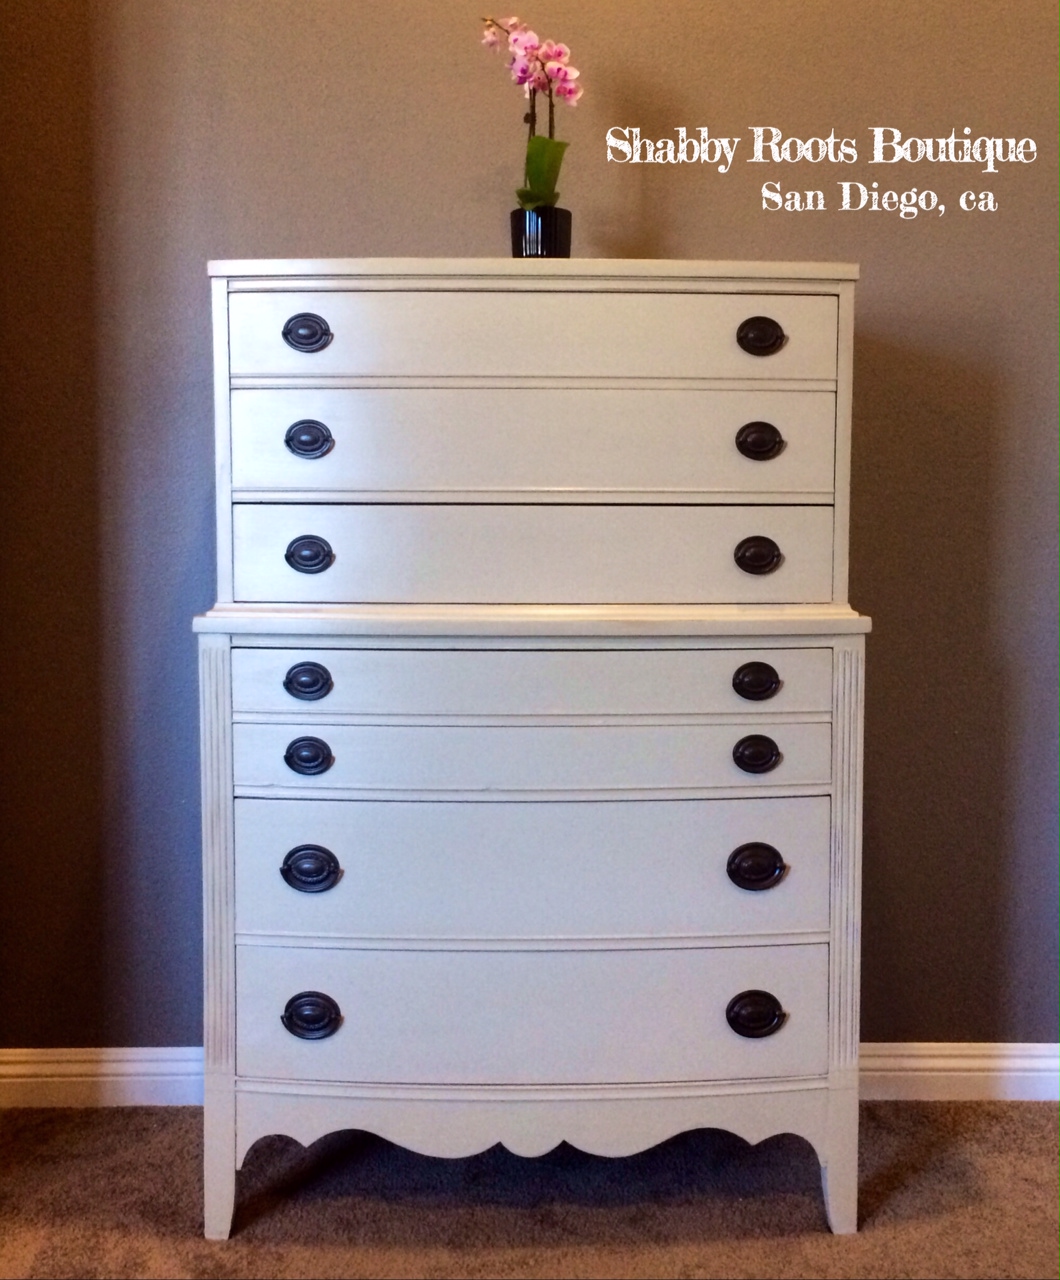 Dixie Vintage Tall Boy Dresser Shabby Roots Boutique